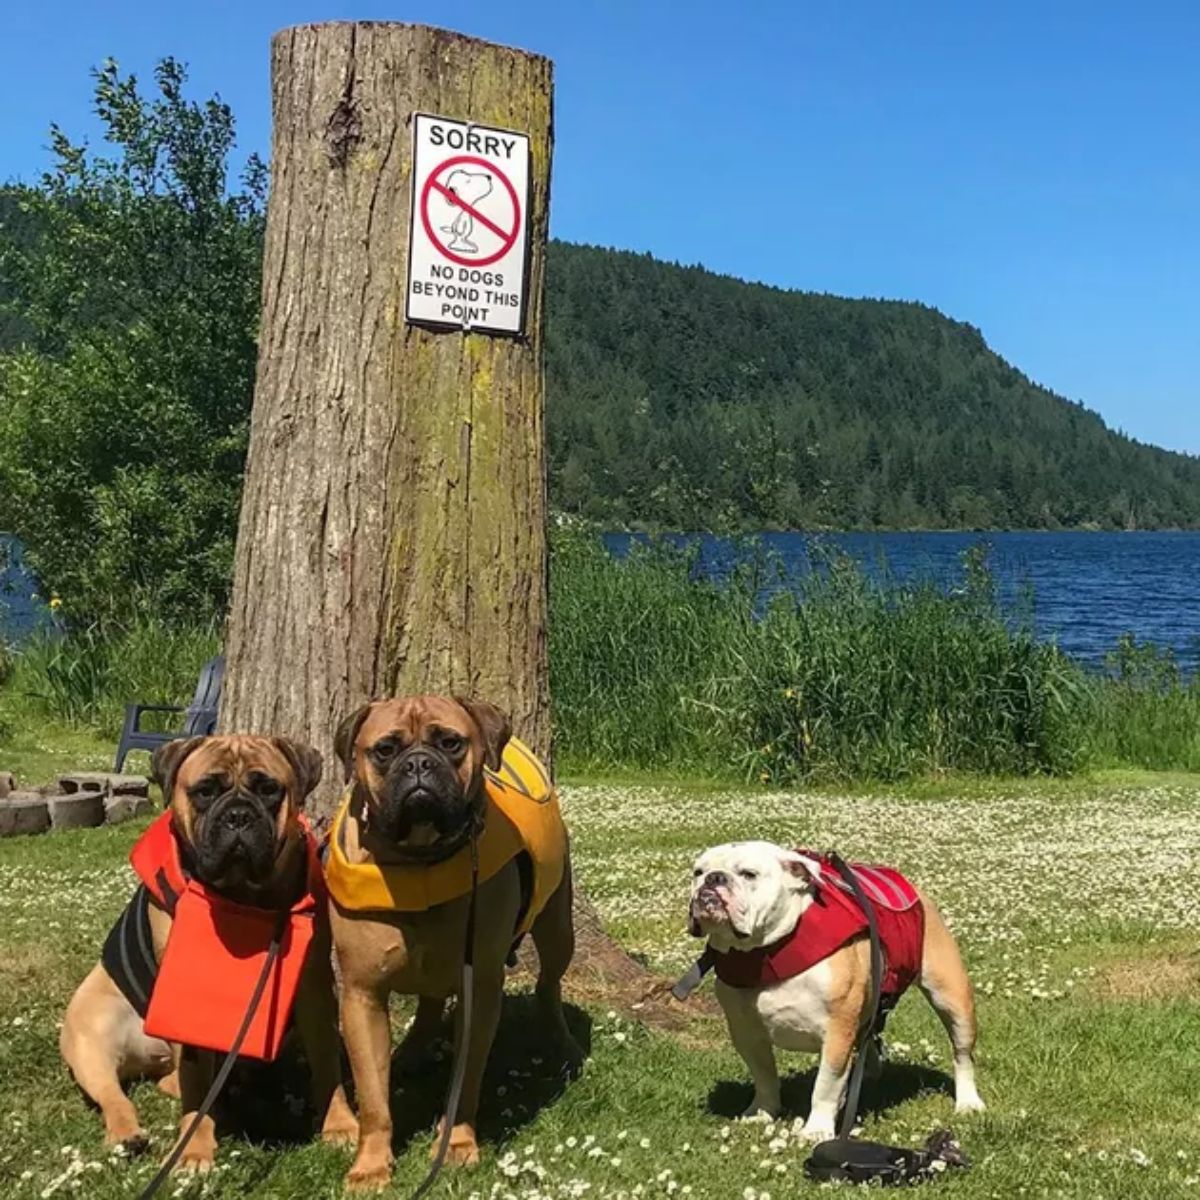 two brown boxers and one brown and white bulldog in large harnesses standing by a tree with a SORRY NO DOGS BEYOND THIS POINT sign